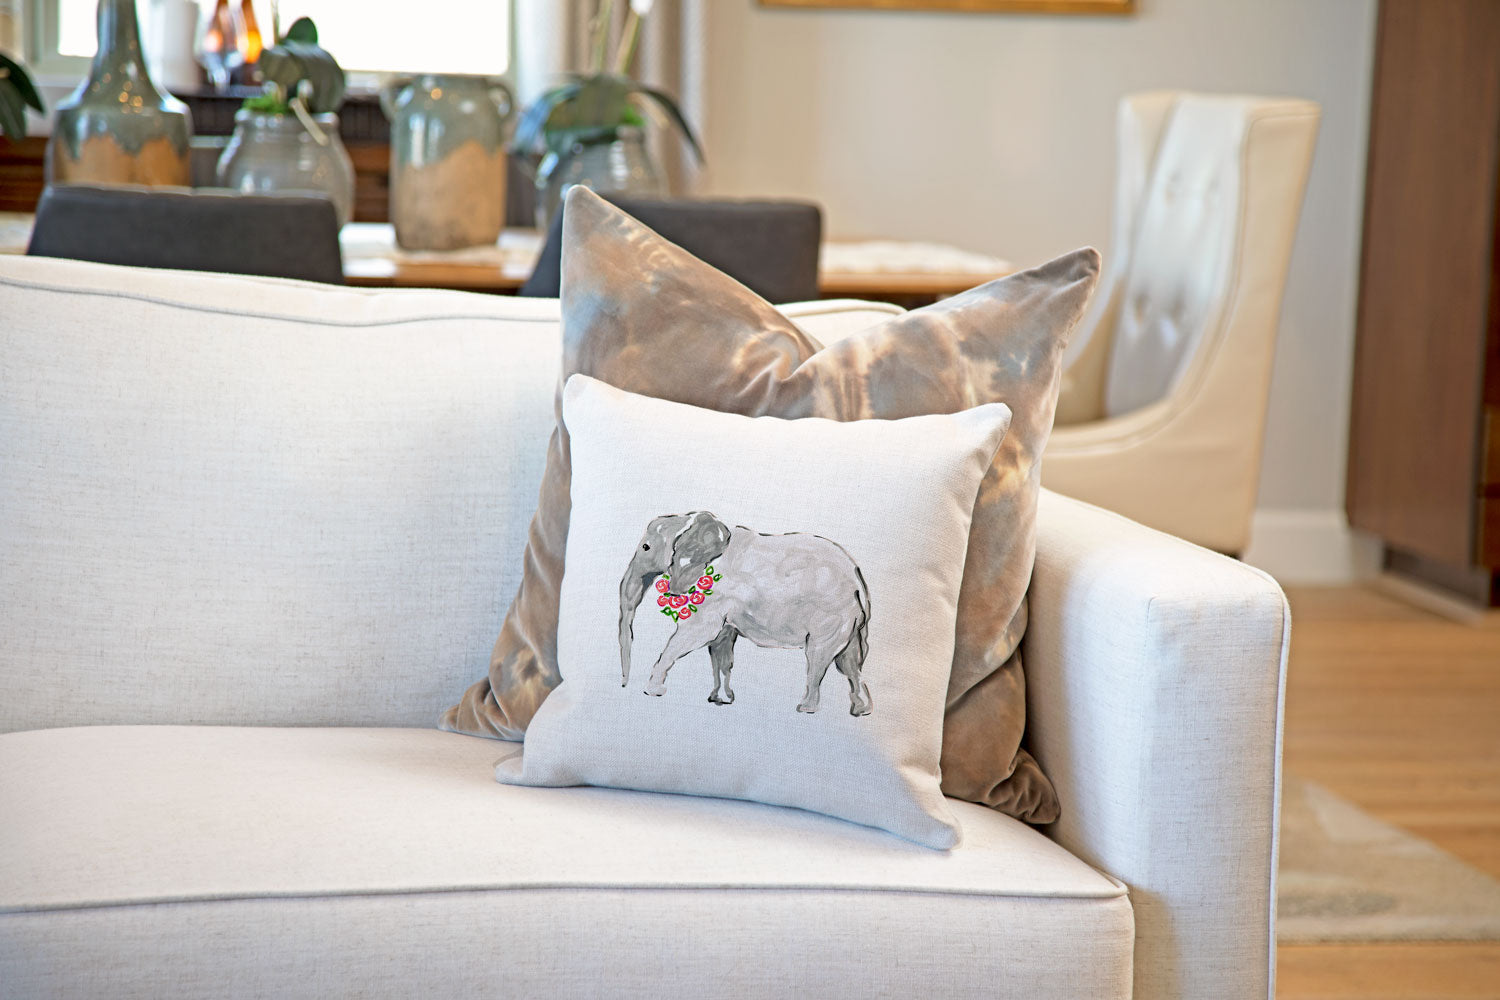 Ella Elephant Throw Pillow Cover - Animal Illustrations Throw Pillow Cover Collection-Di Lewis